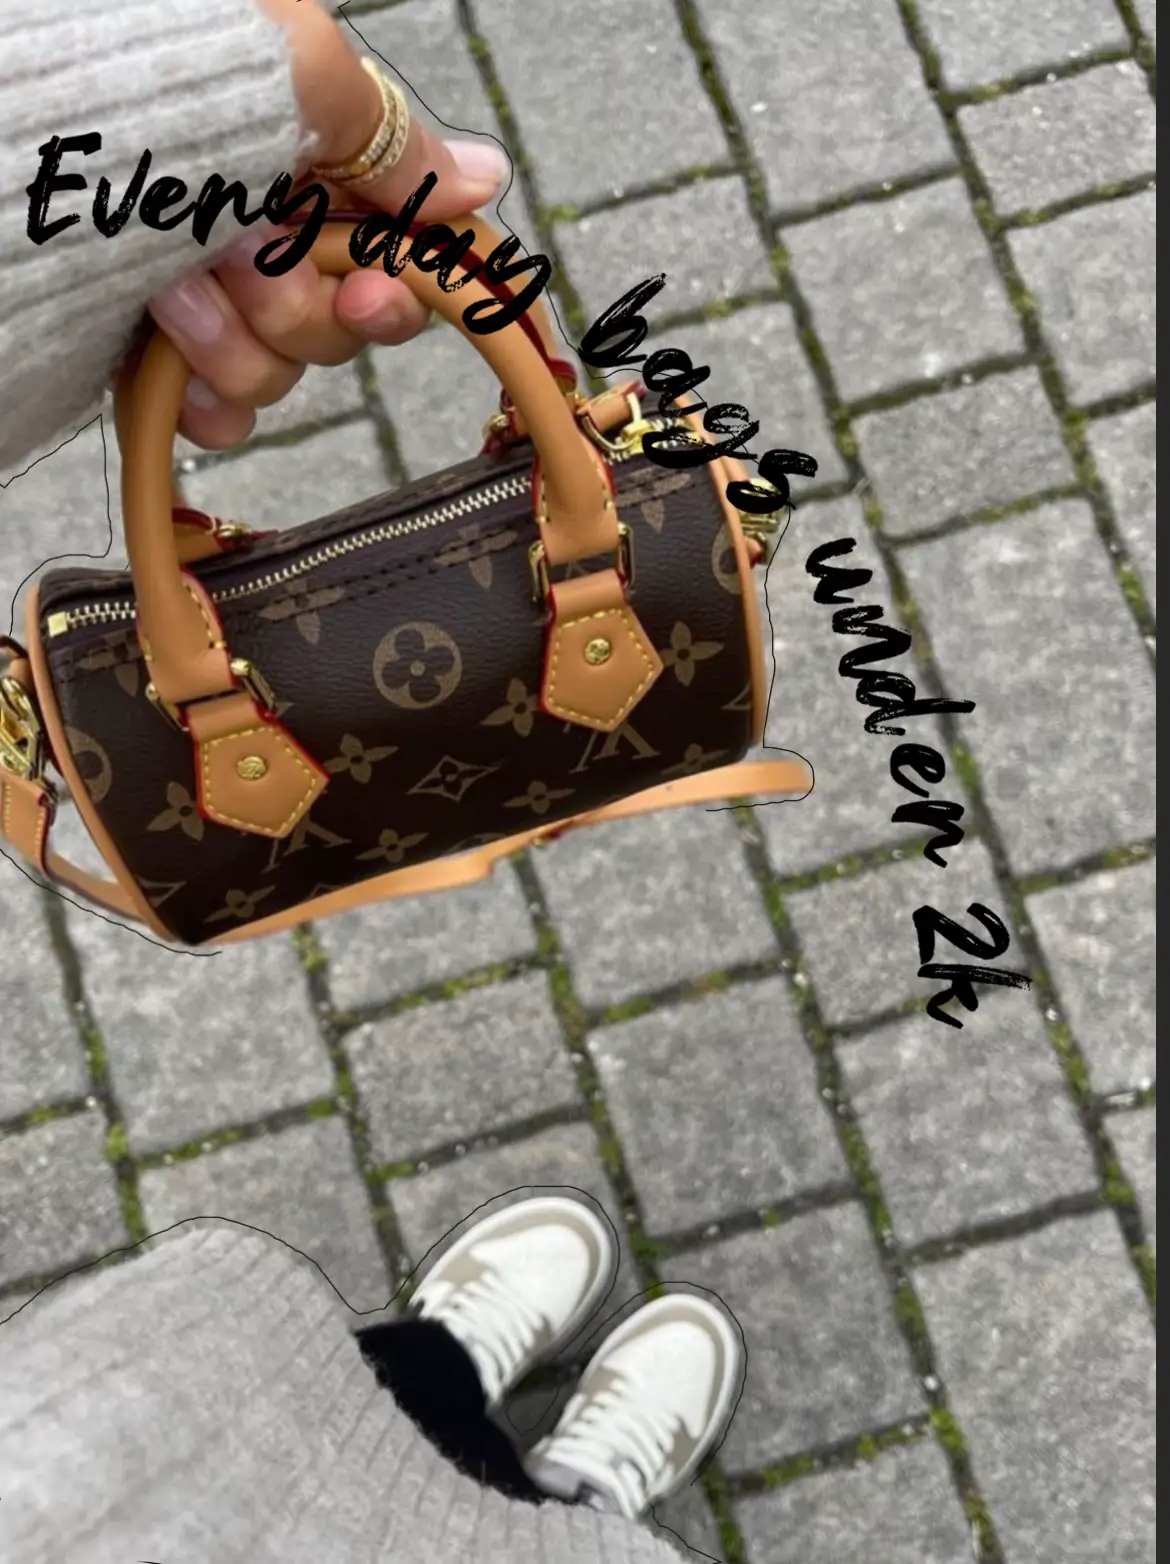 Everyday designer bags under 2k, Gallery posted by Wealthyj